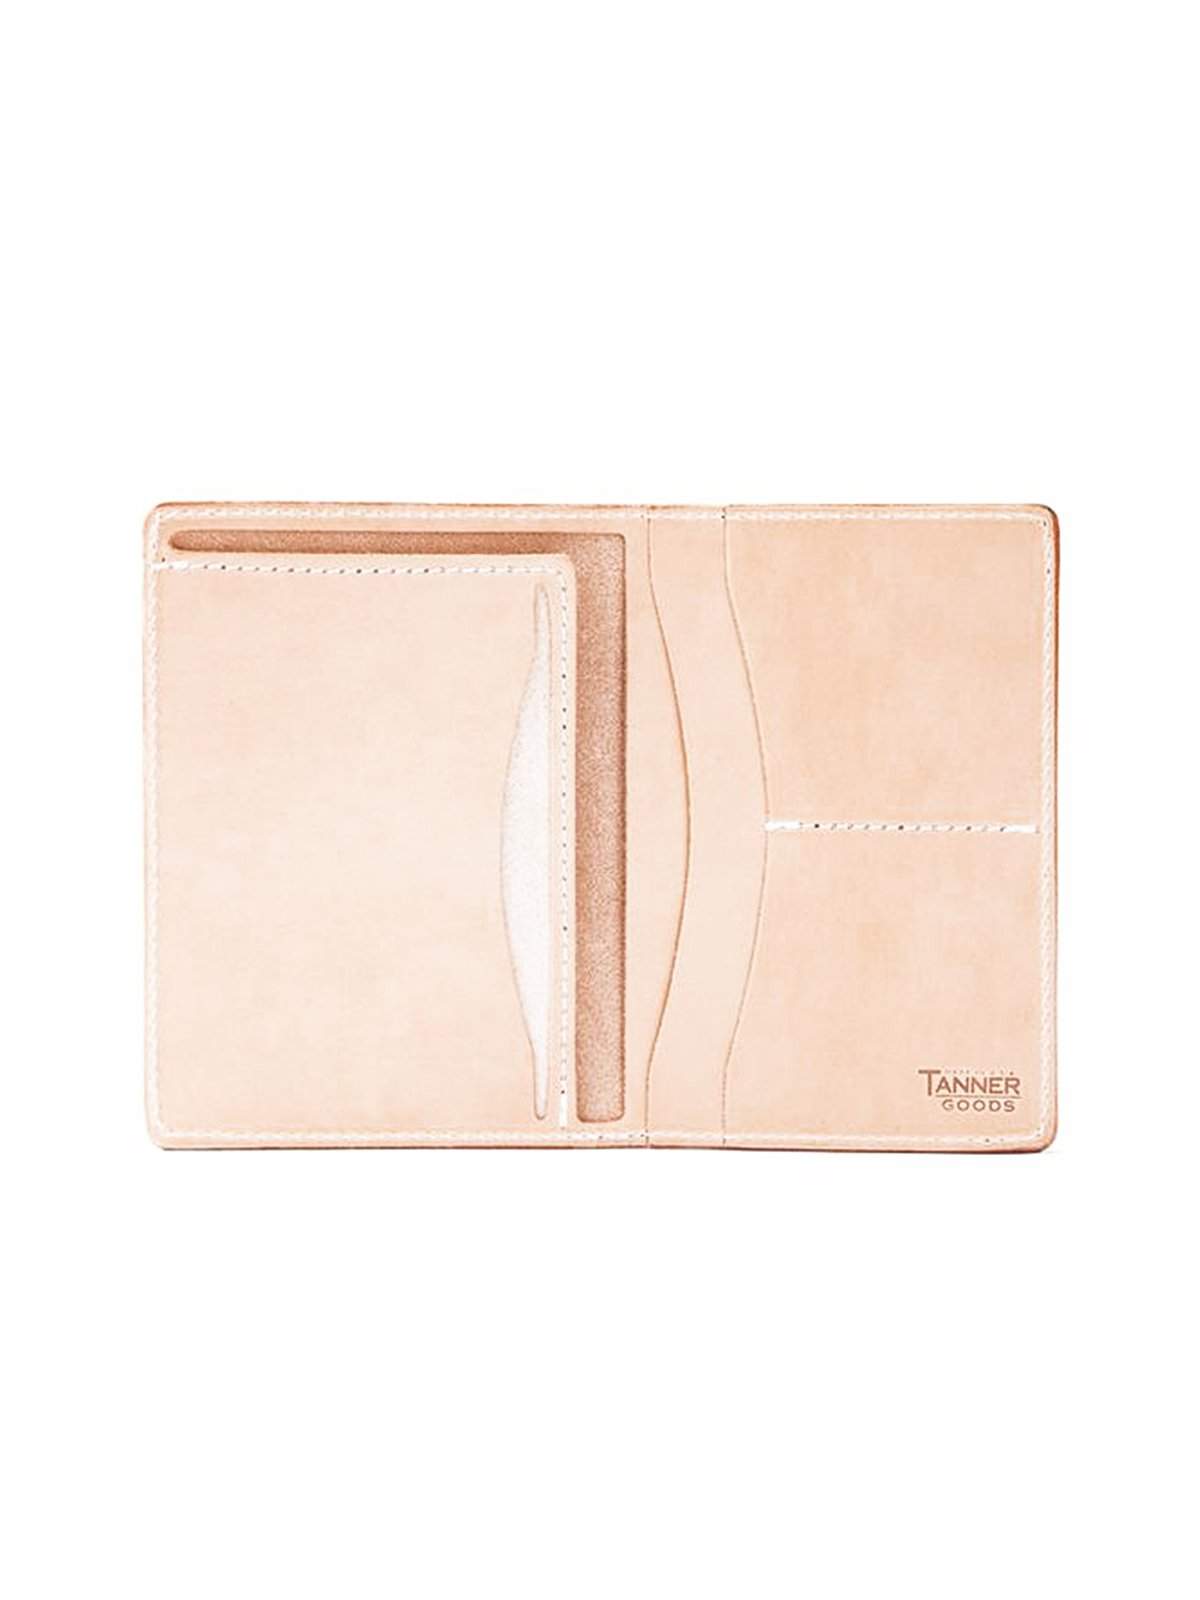 Tanner Goods Travel Wallet Natural - MORE by Morello Indonesia